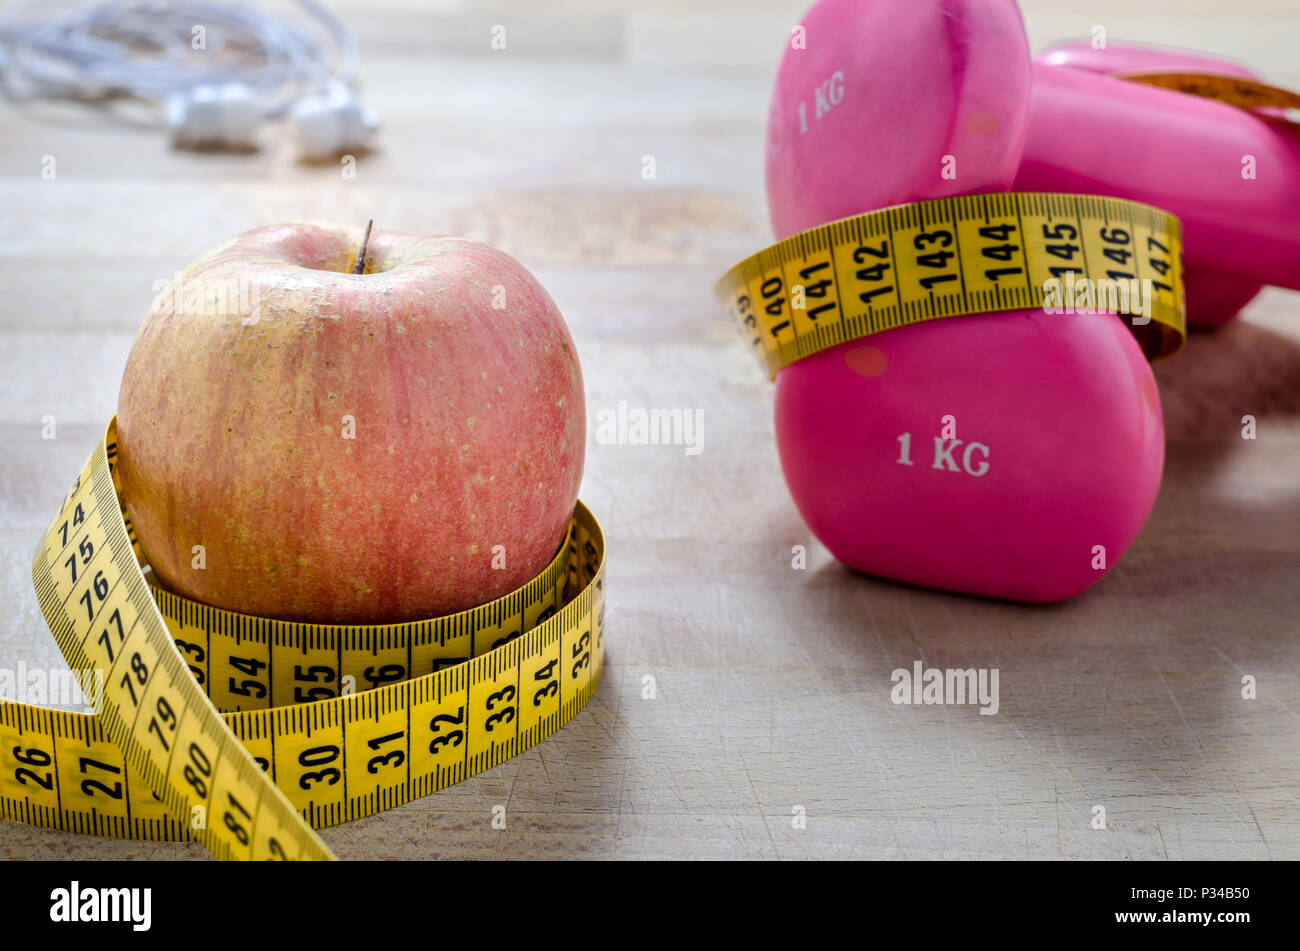 still life and close up with apple, pink weight, yellow tape measure. fitness and lifestyle concepts. Stock Photo